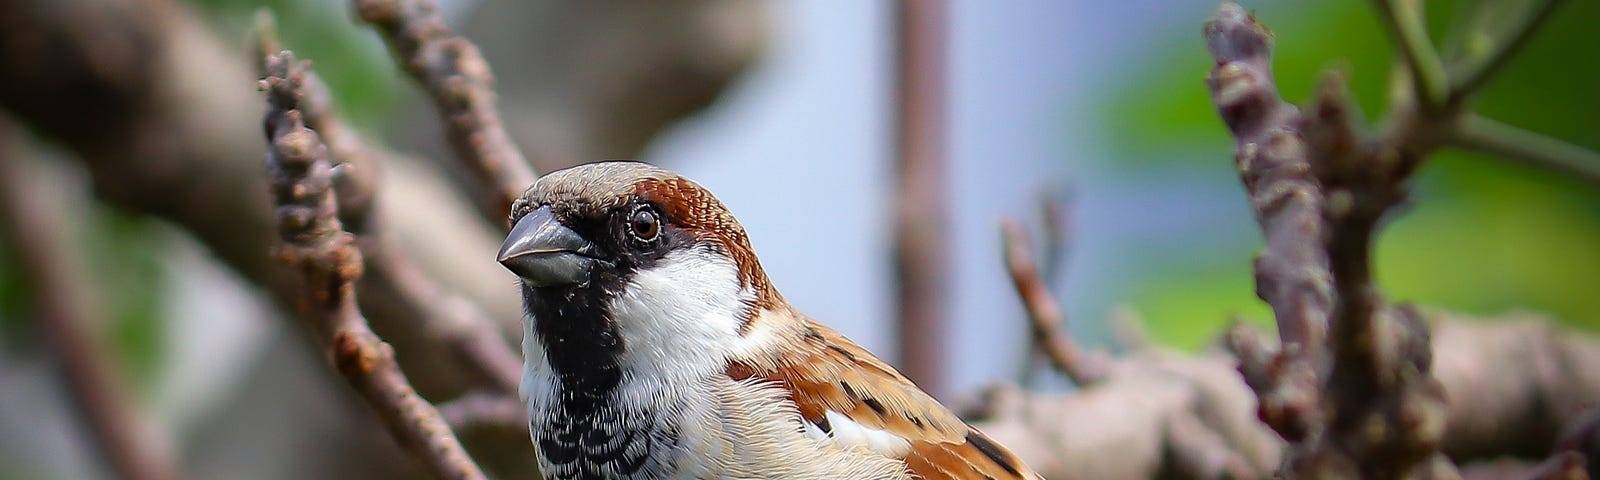 A sparrow on a tree branch.